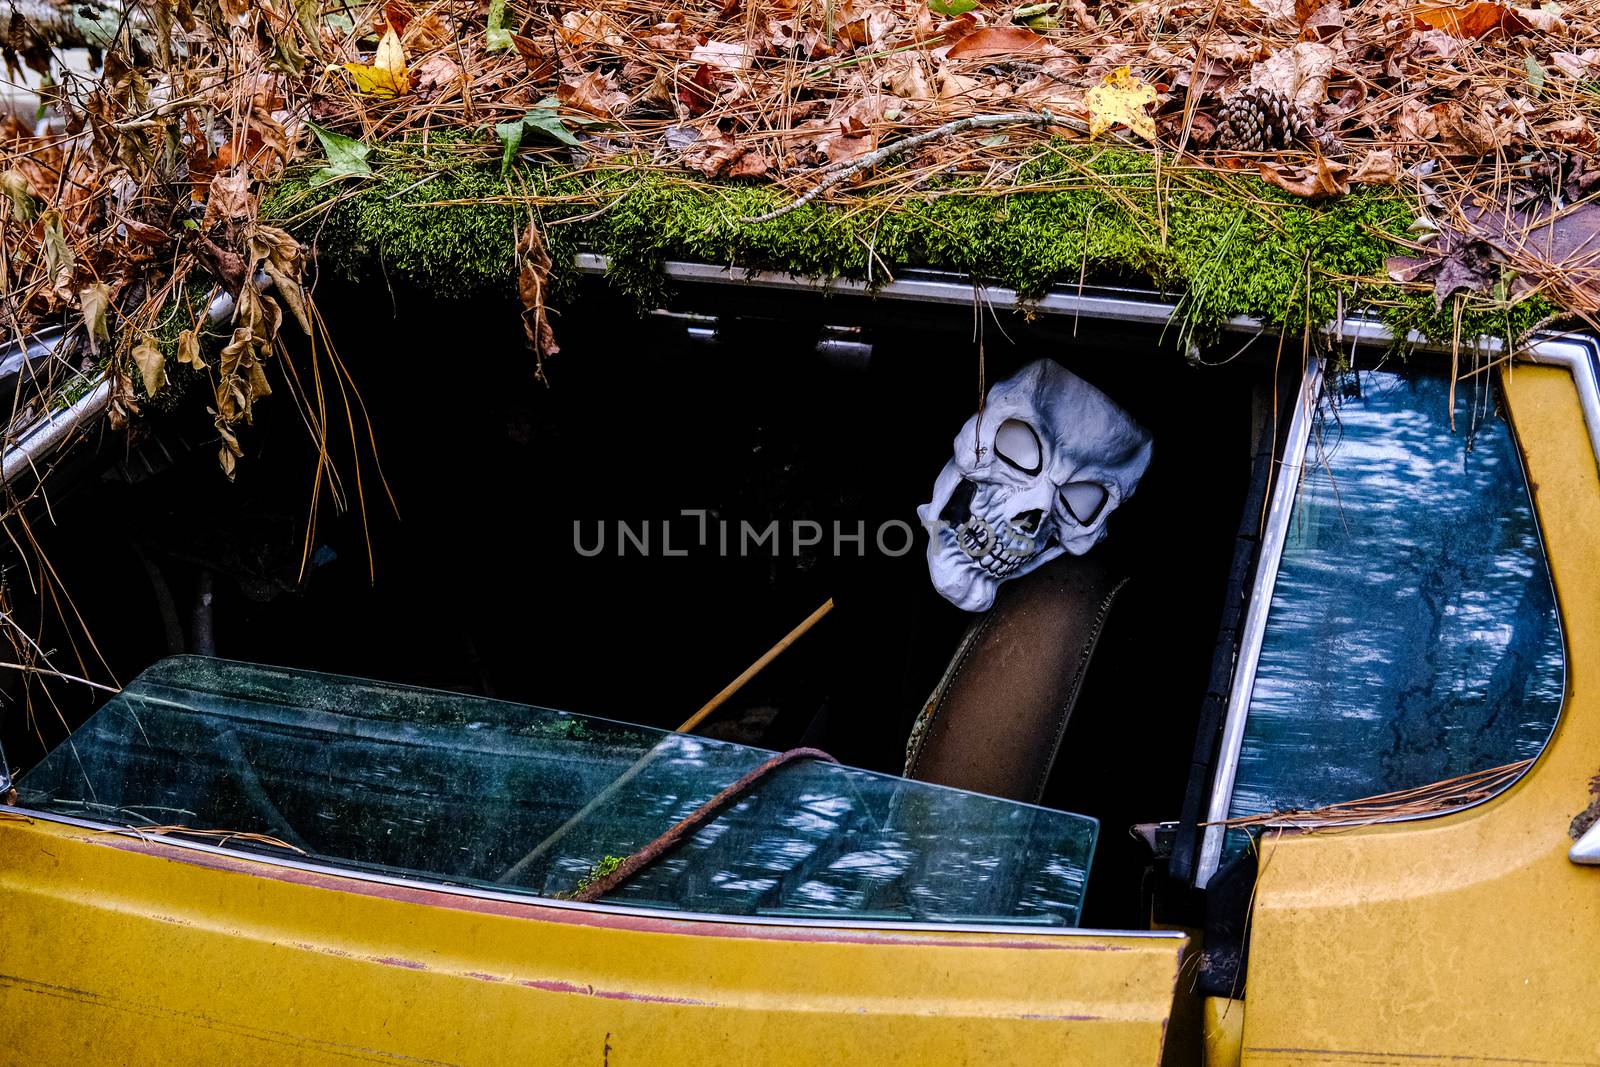 Skull Mask in Wrecked Car by dbvirago